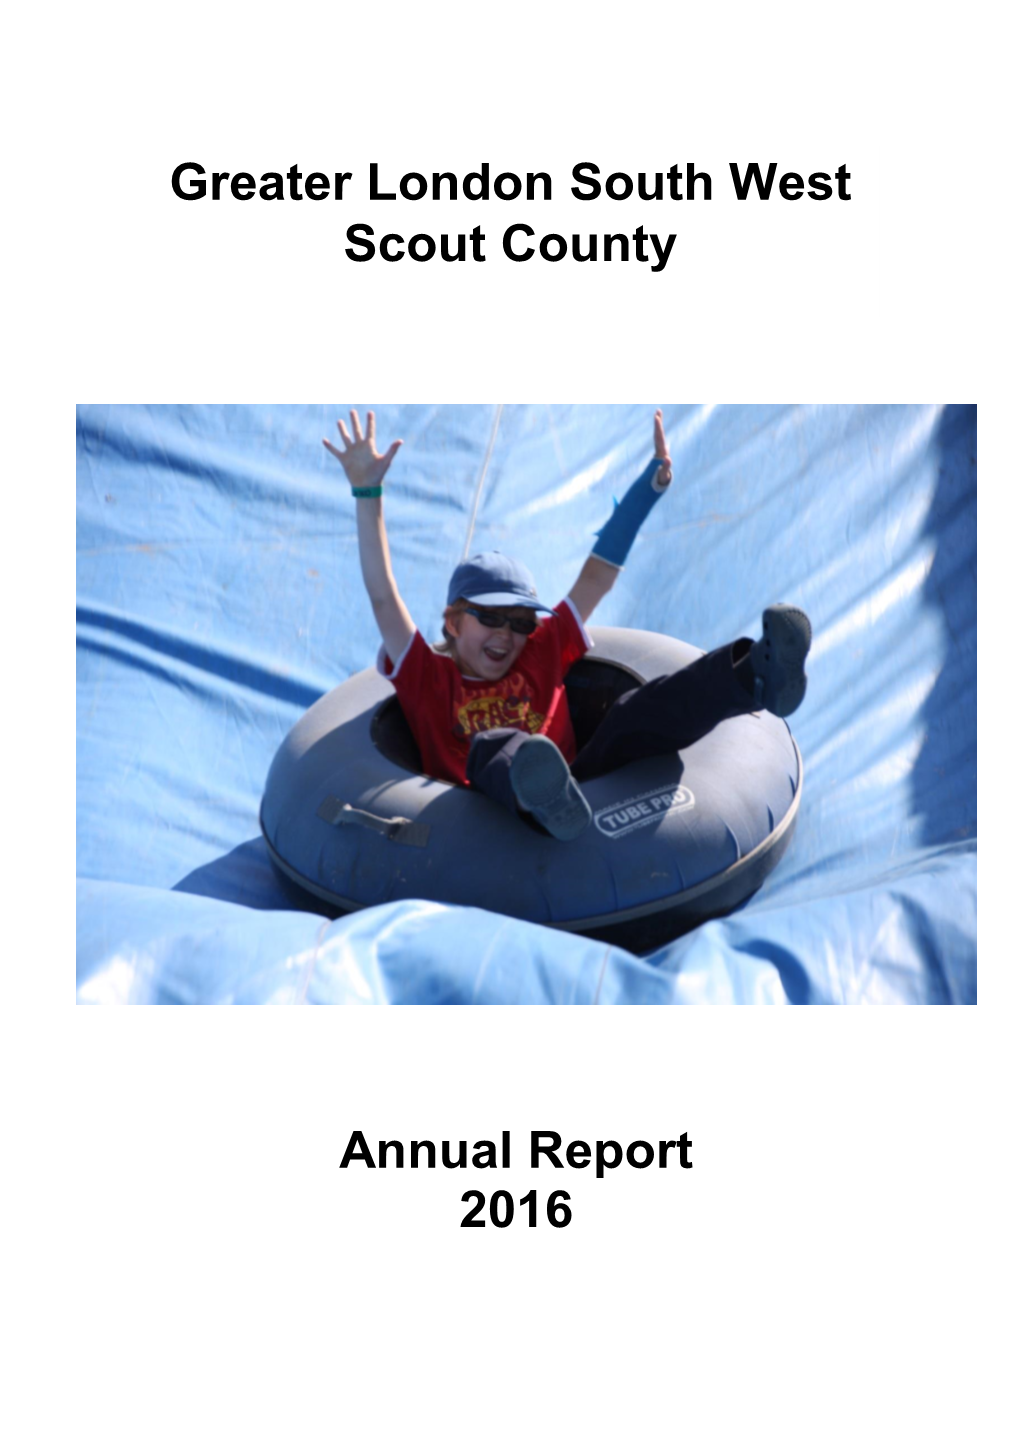 Greater London South West Scout County Annual Report 2016